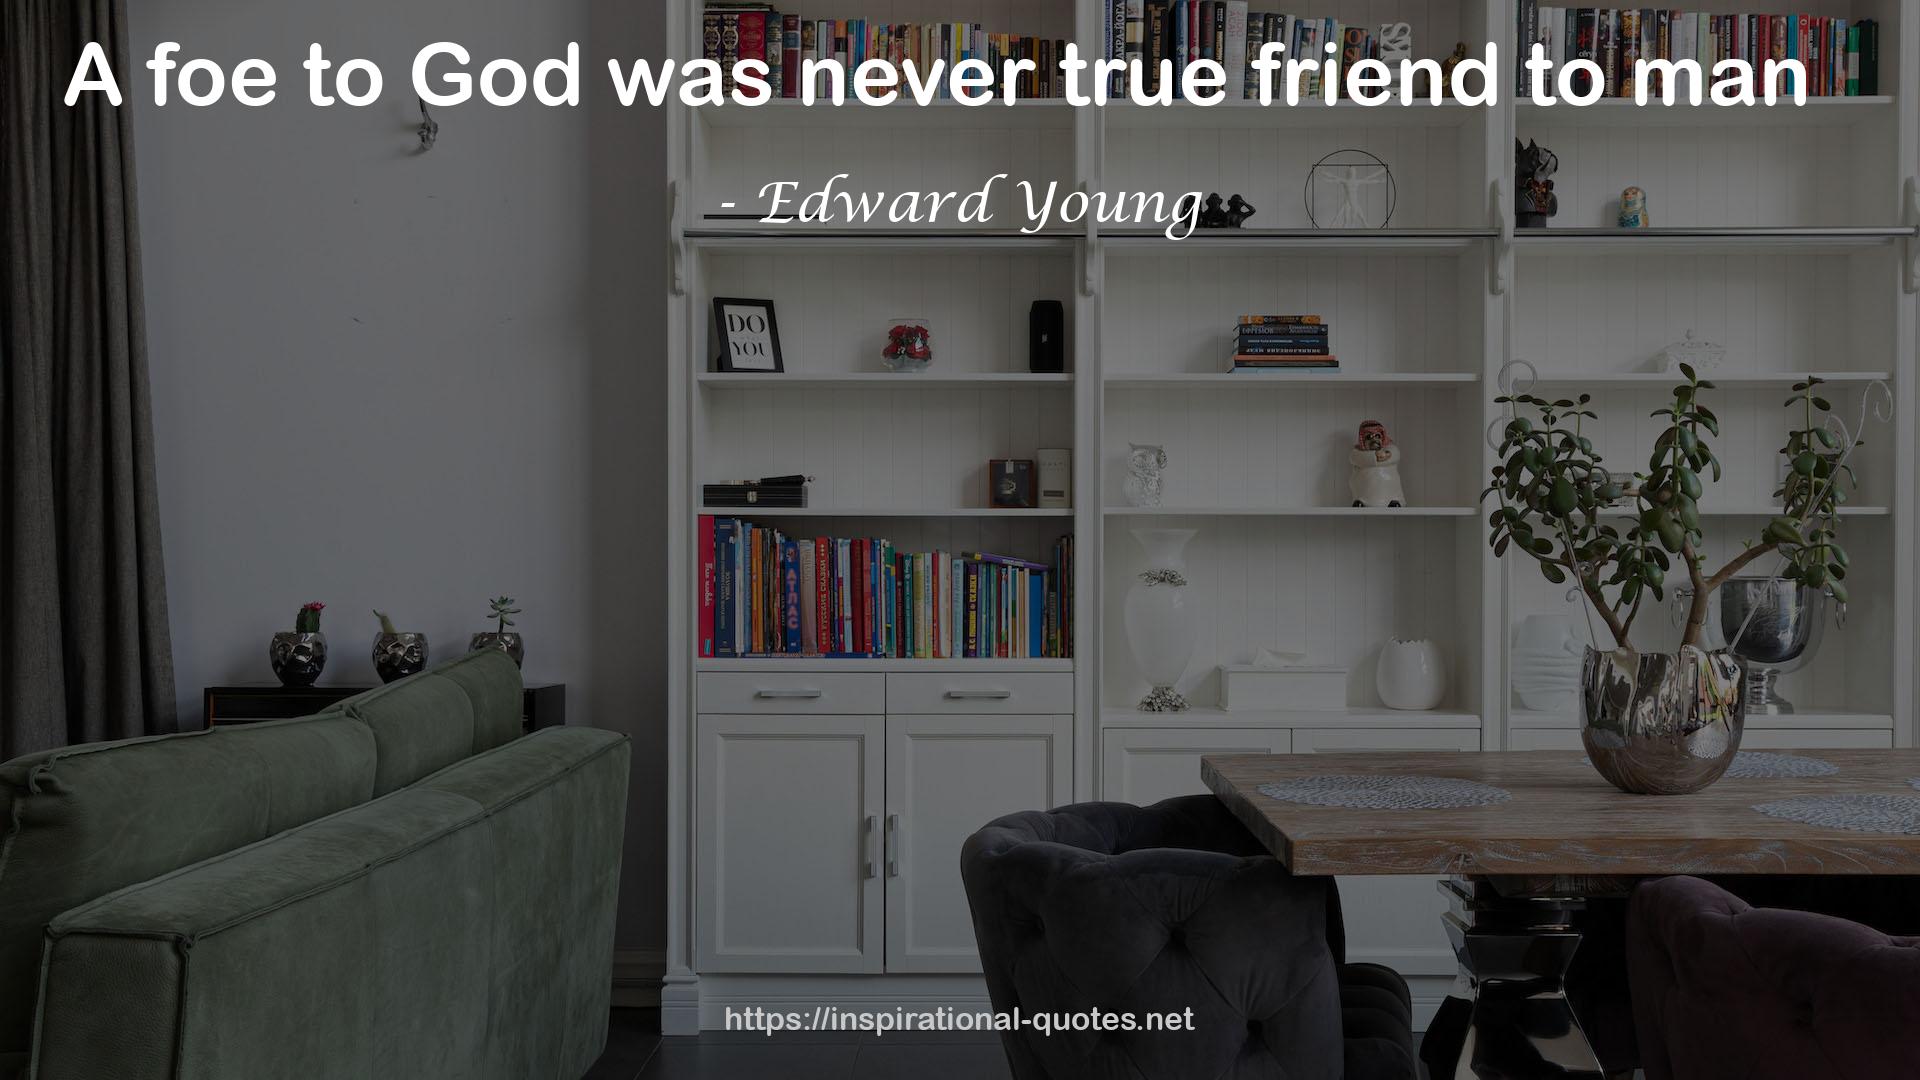 Edward Young QUOTES